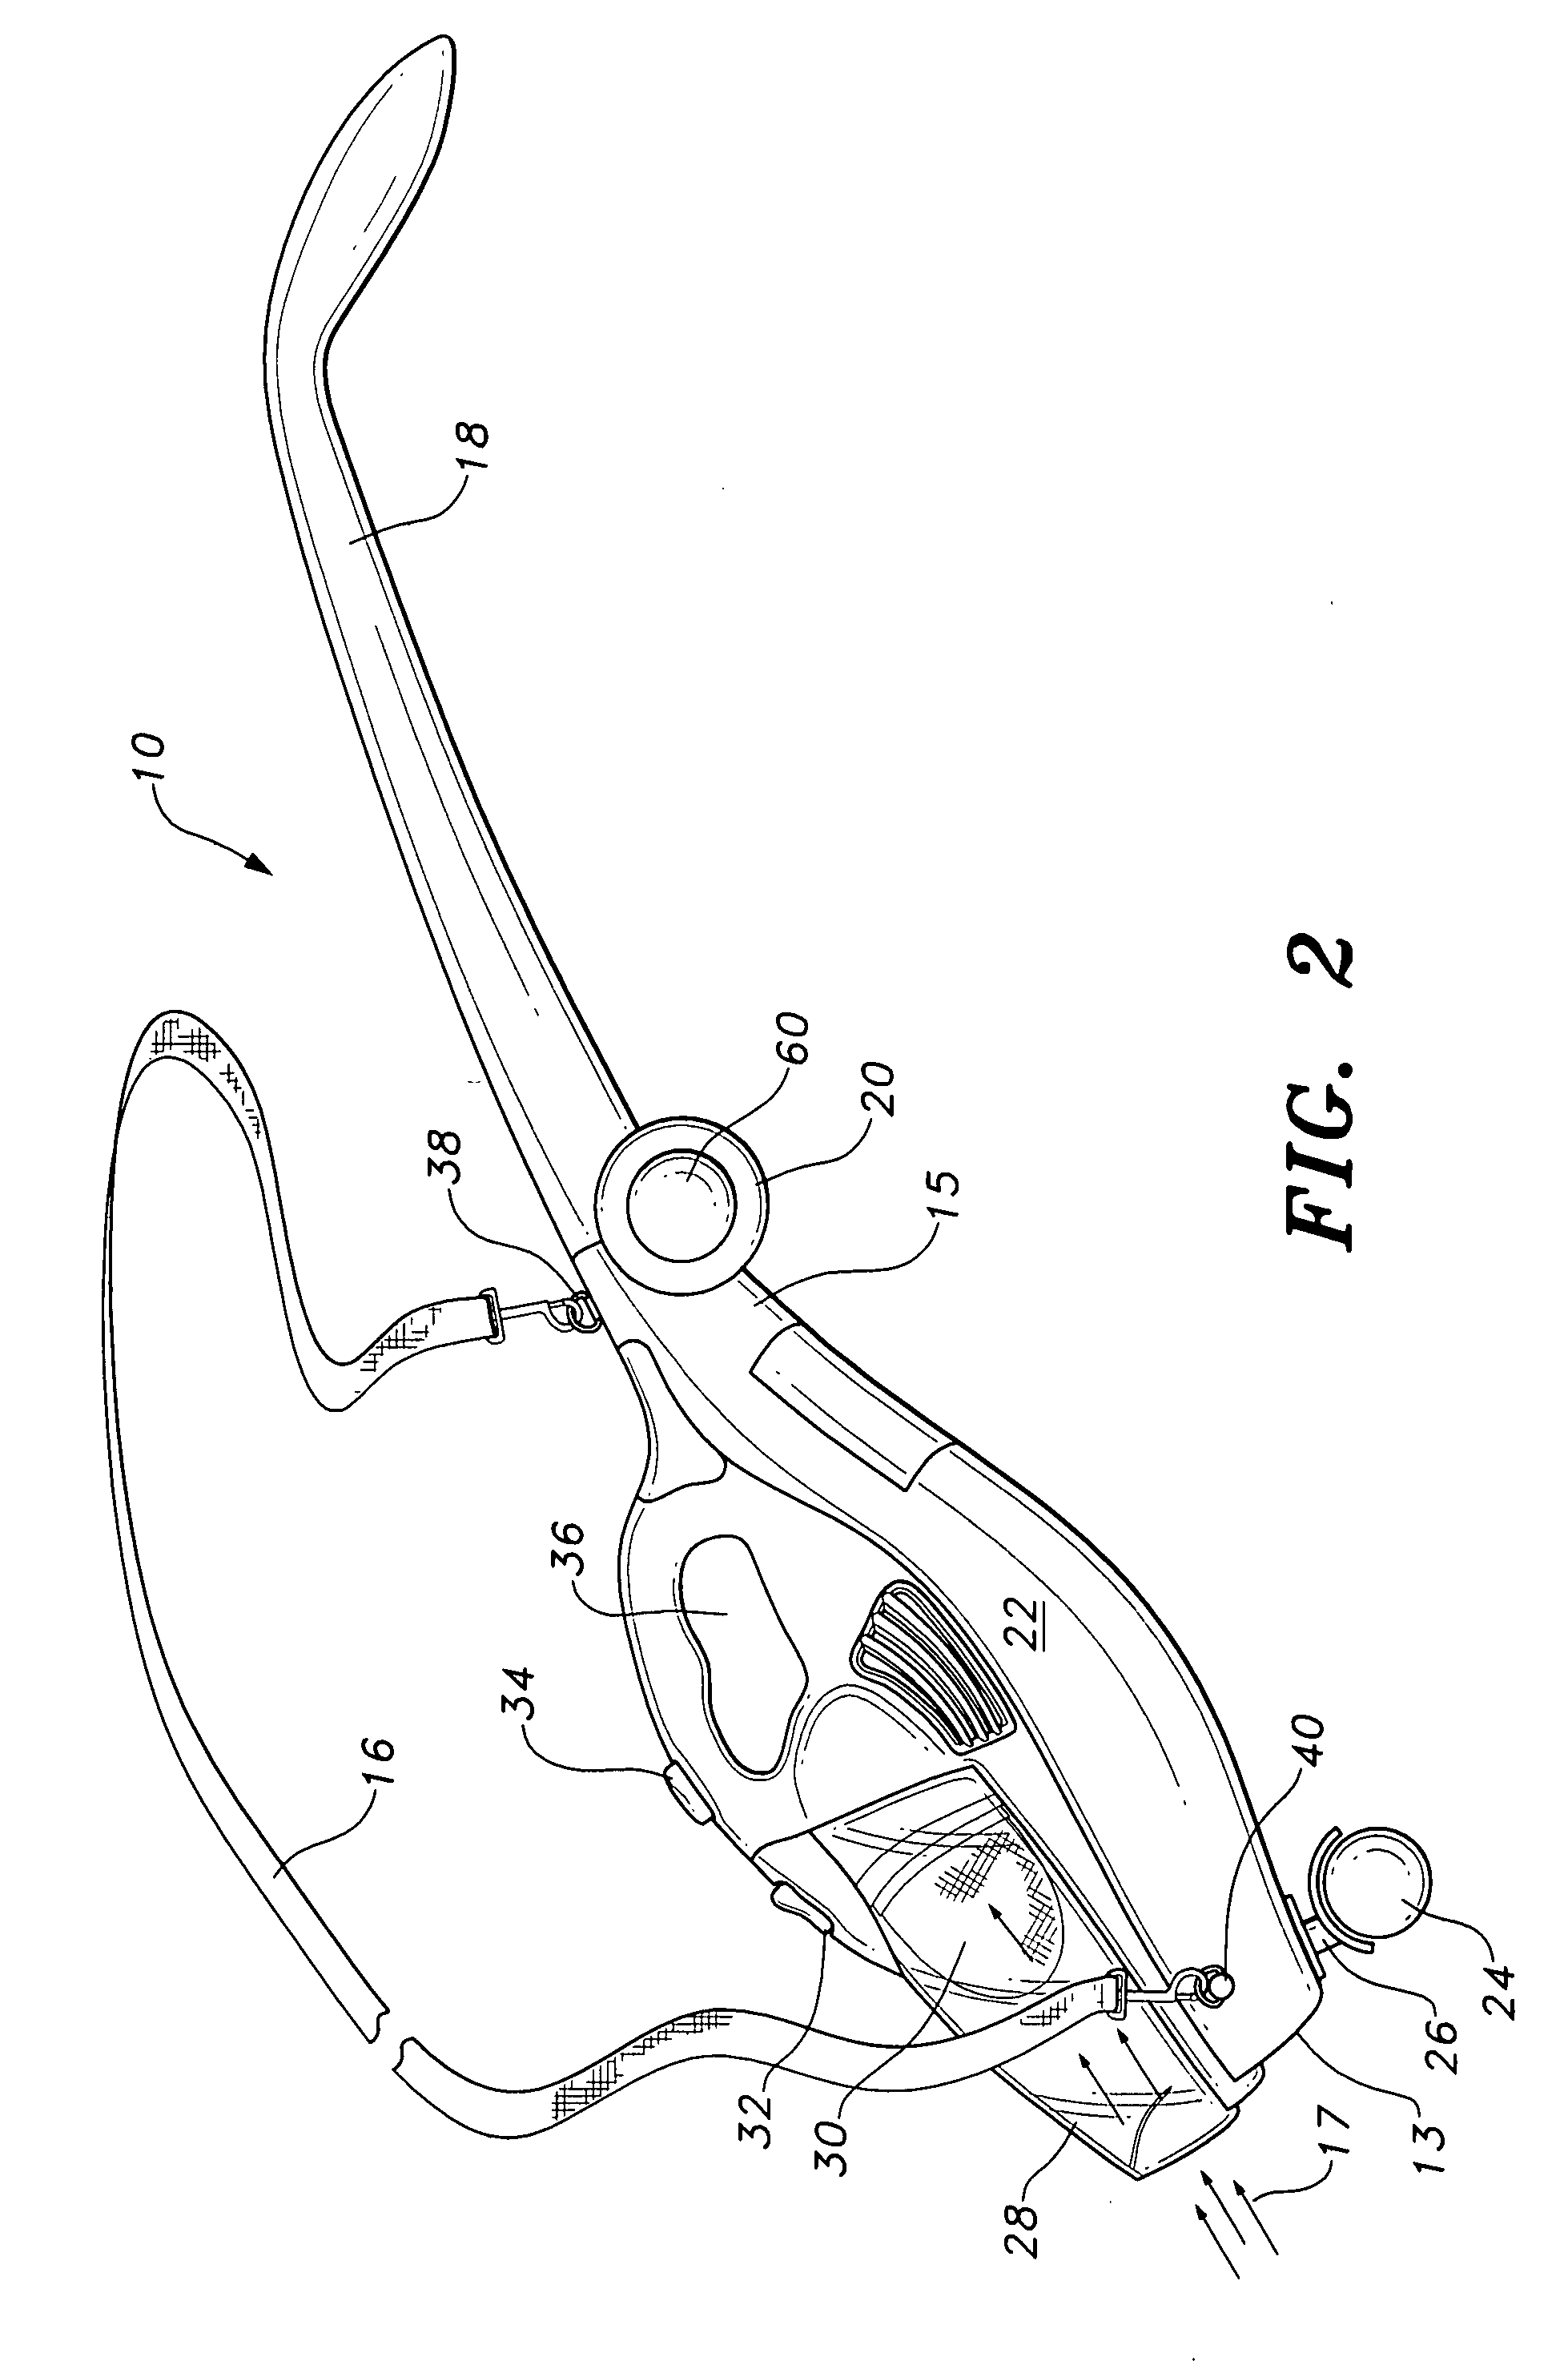 Vacuum device for removal of animal waste